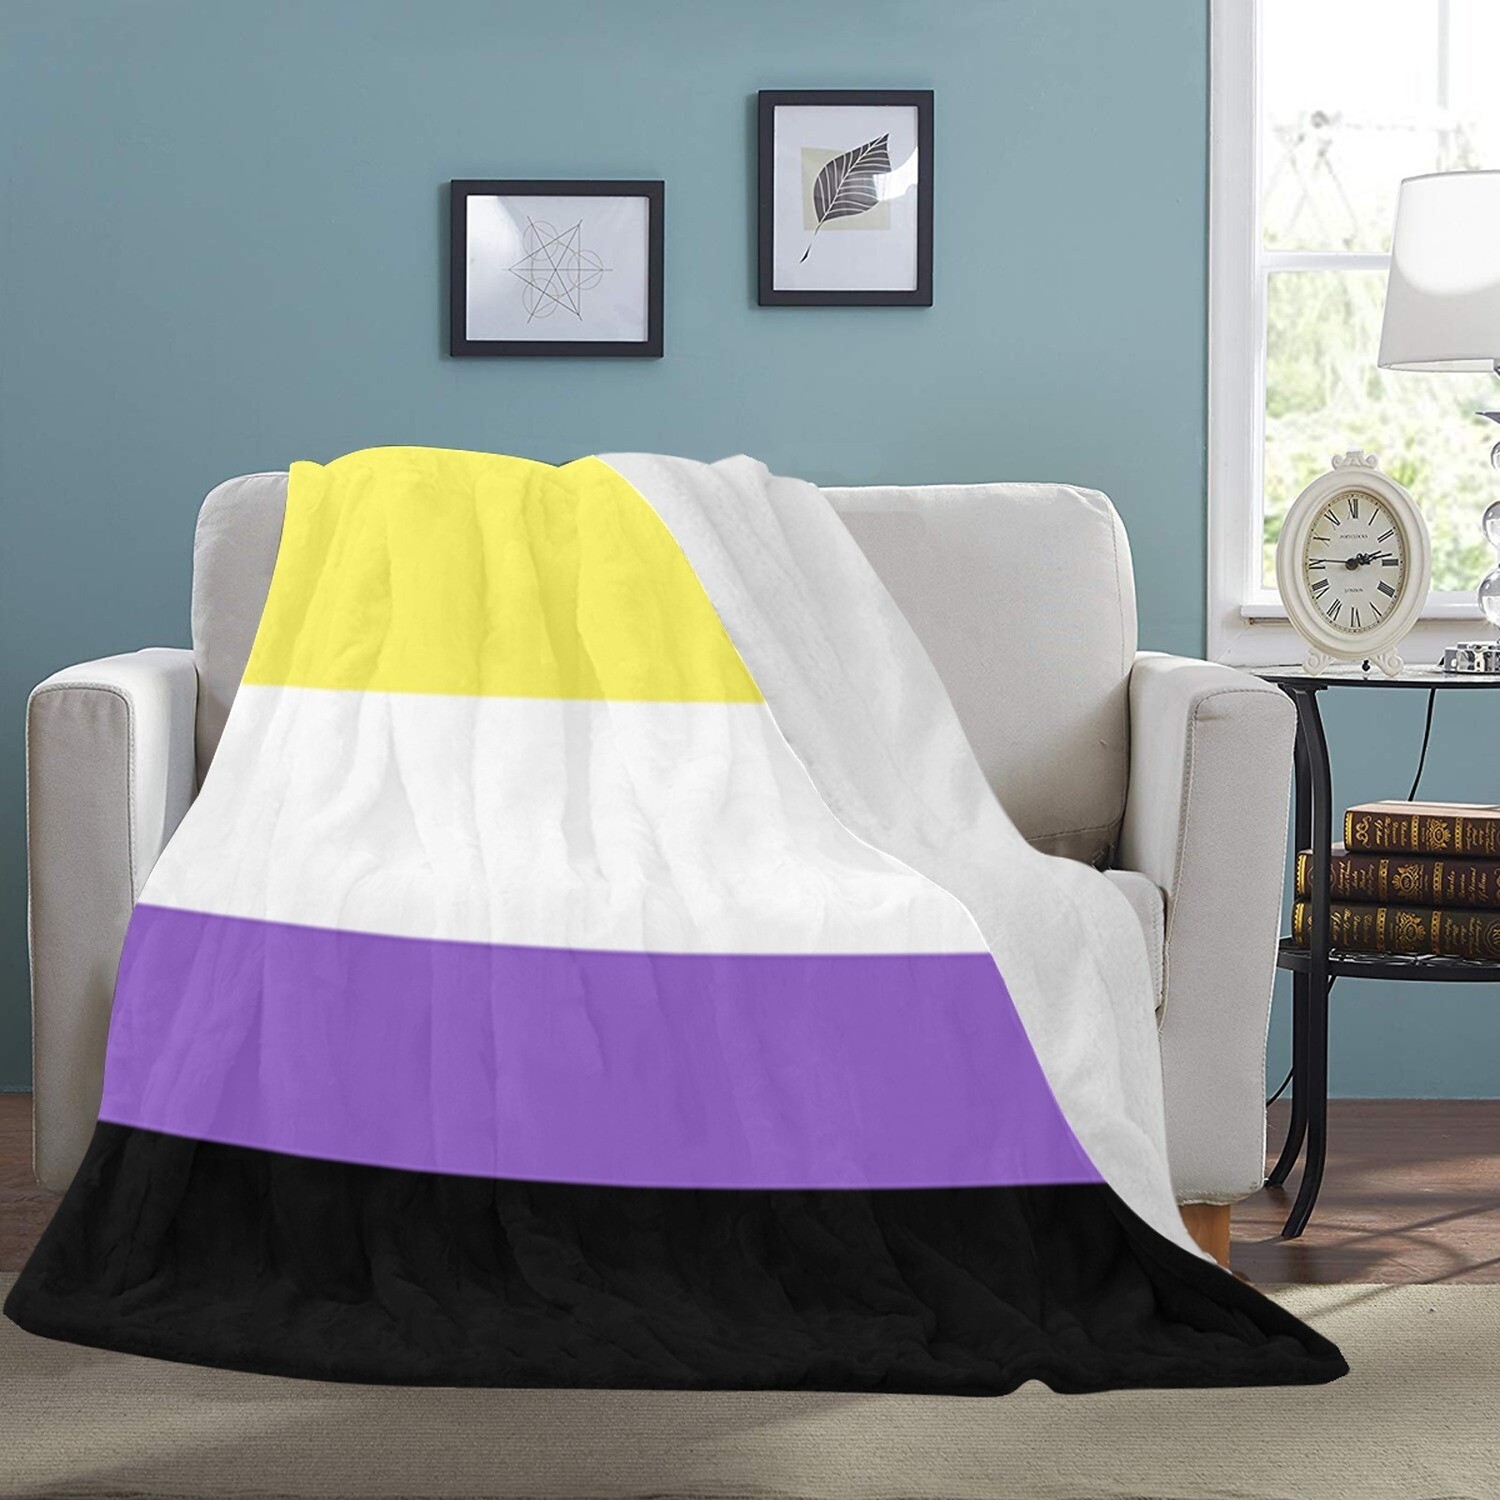 🤴🏽👸🏽🏳️‍🌈 Large Ultra-Soft Micro Fleece Blanket Love is Love Nonbinary Pride Flag by Kye Rowan 2014, gift, gift for her, gift for him, gift for them, 70"x80"